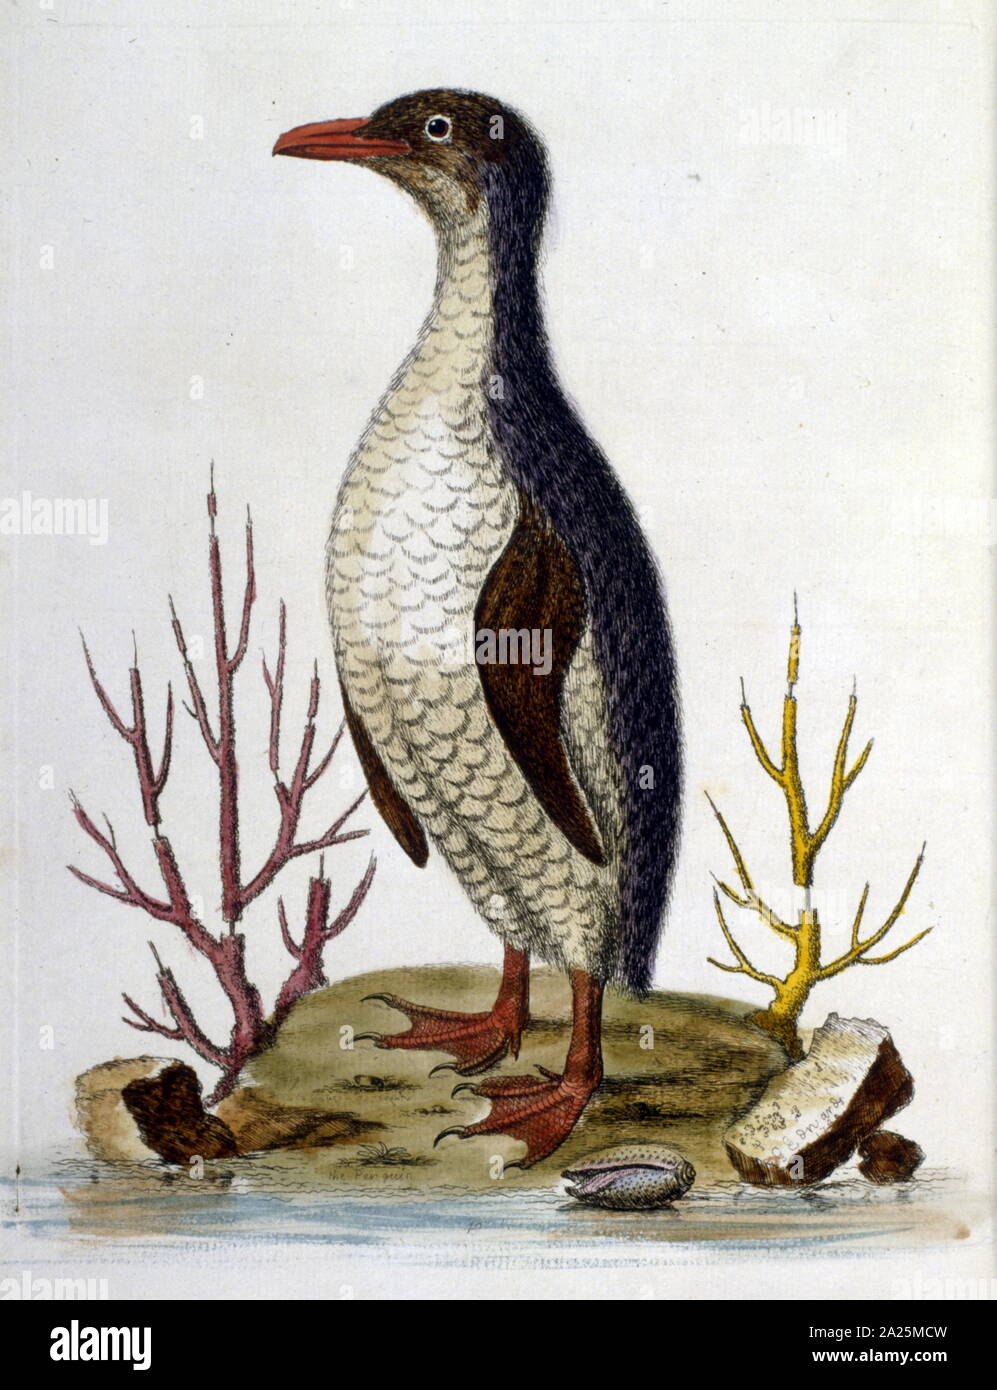 watercolour illustration from a book of rare birds by G Edwards 1750. George Edwards (1694-1773) was a British naturalist and ornithologist. He travelled extensively through Europe, studying natural history and birds in particular. He gained some recognition for his coloured drawings, and published his first work in 1743 - the first volume of A Natural History of Uncommon Birds. Stock Photo